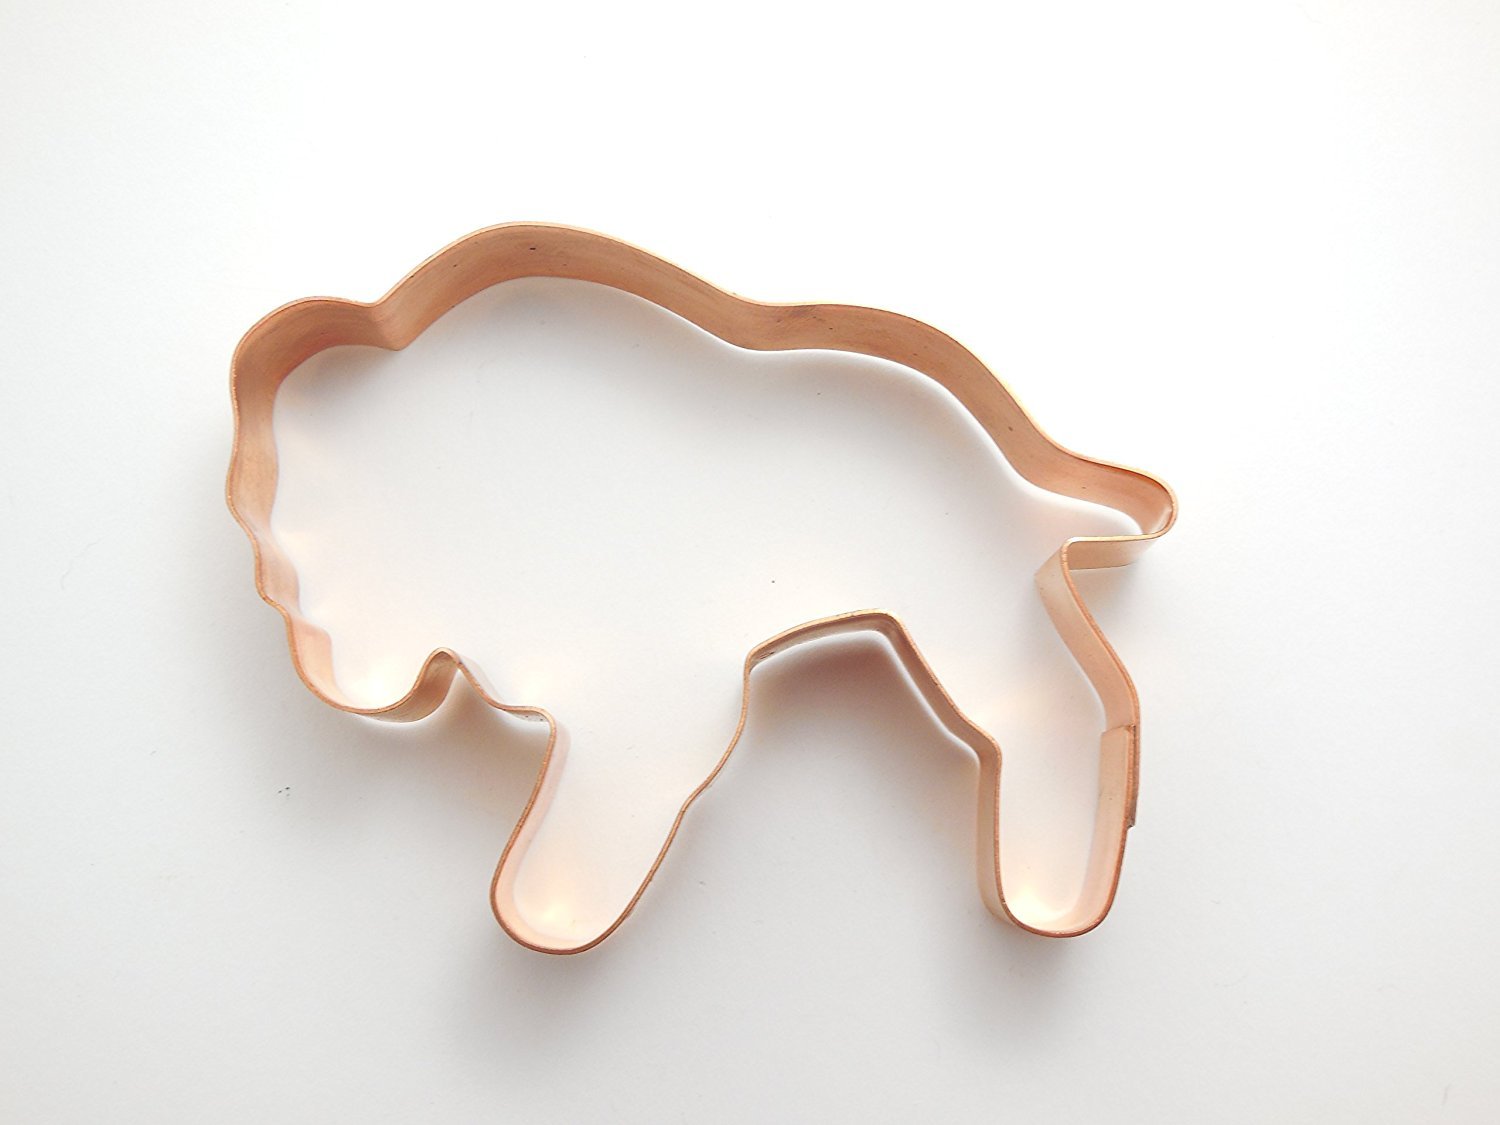 Buffalo/Bison Cookie Cutter 4.5 X 3.5 inches - Handcrafted Copper Cookie Cutter by The Fussy Pup